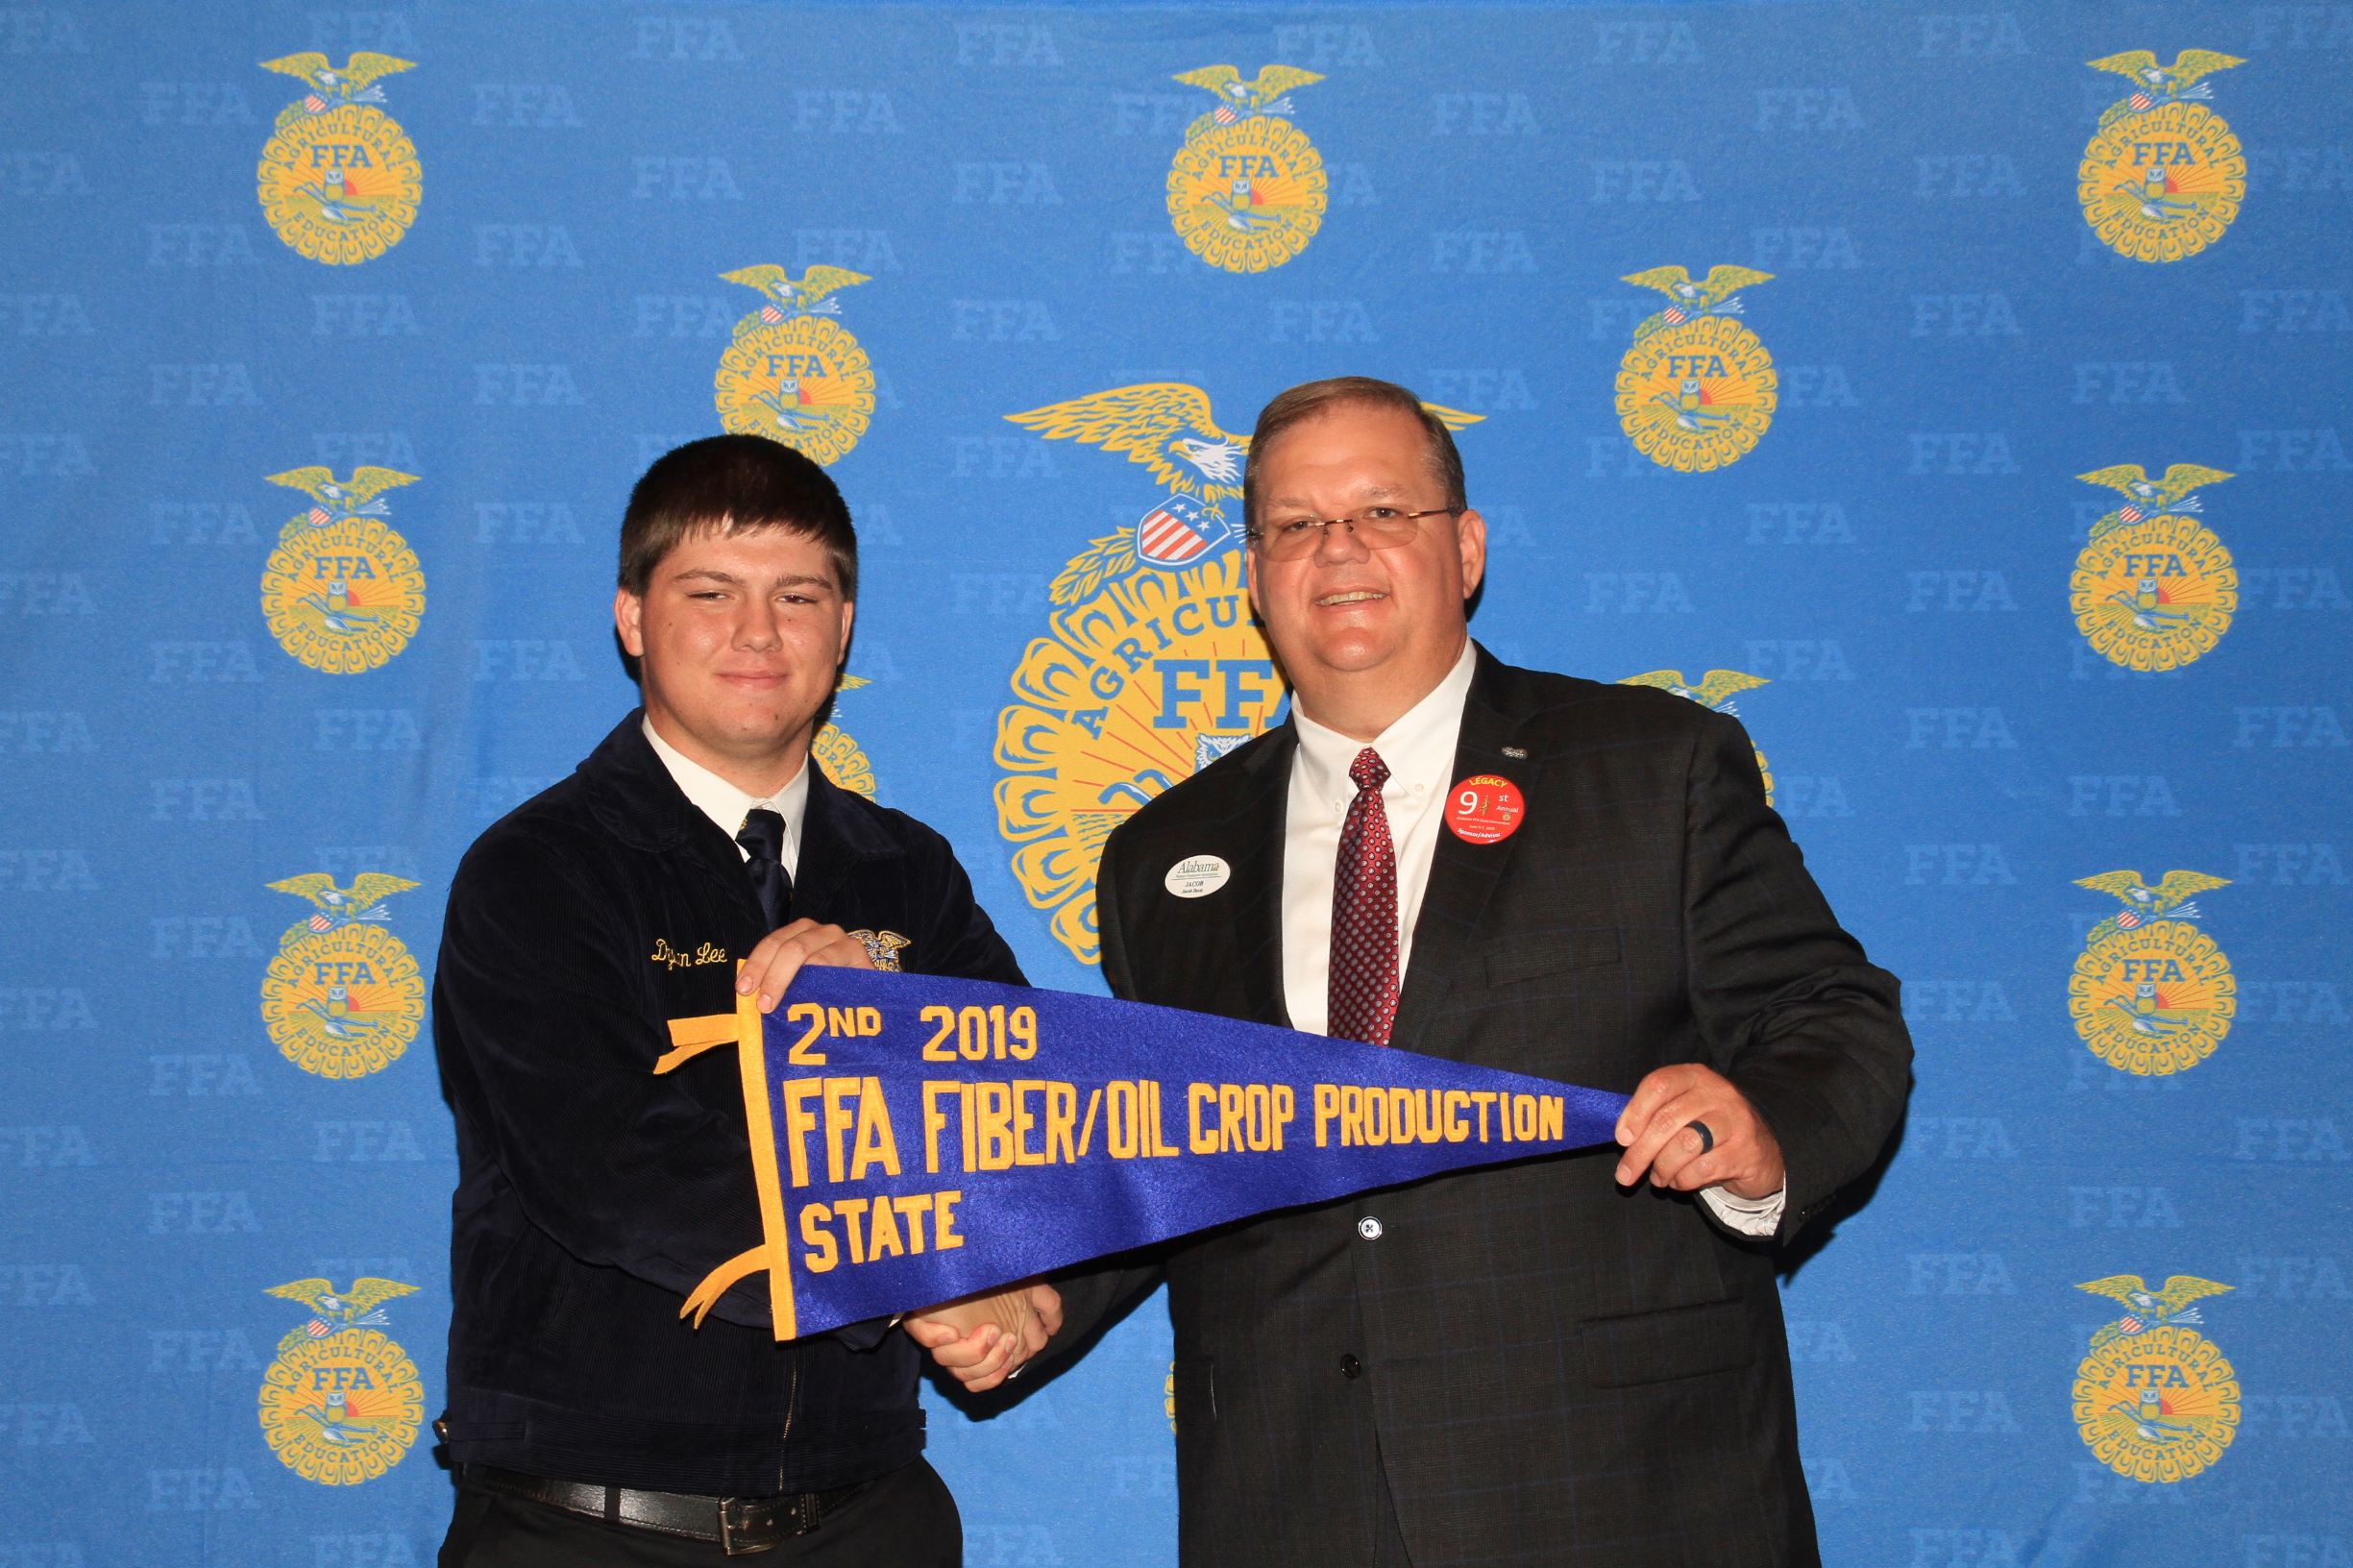 Lee is Runner-Up of Alabama FFA Fiber and/or Oil Crop Production Proficiency Award